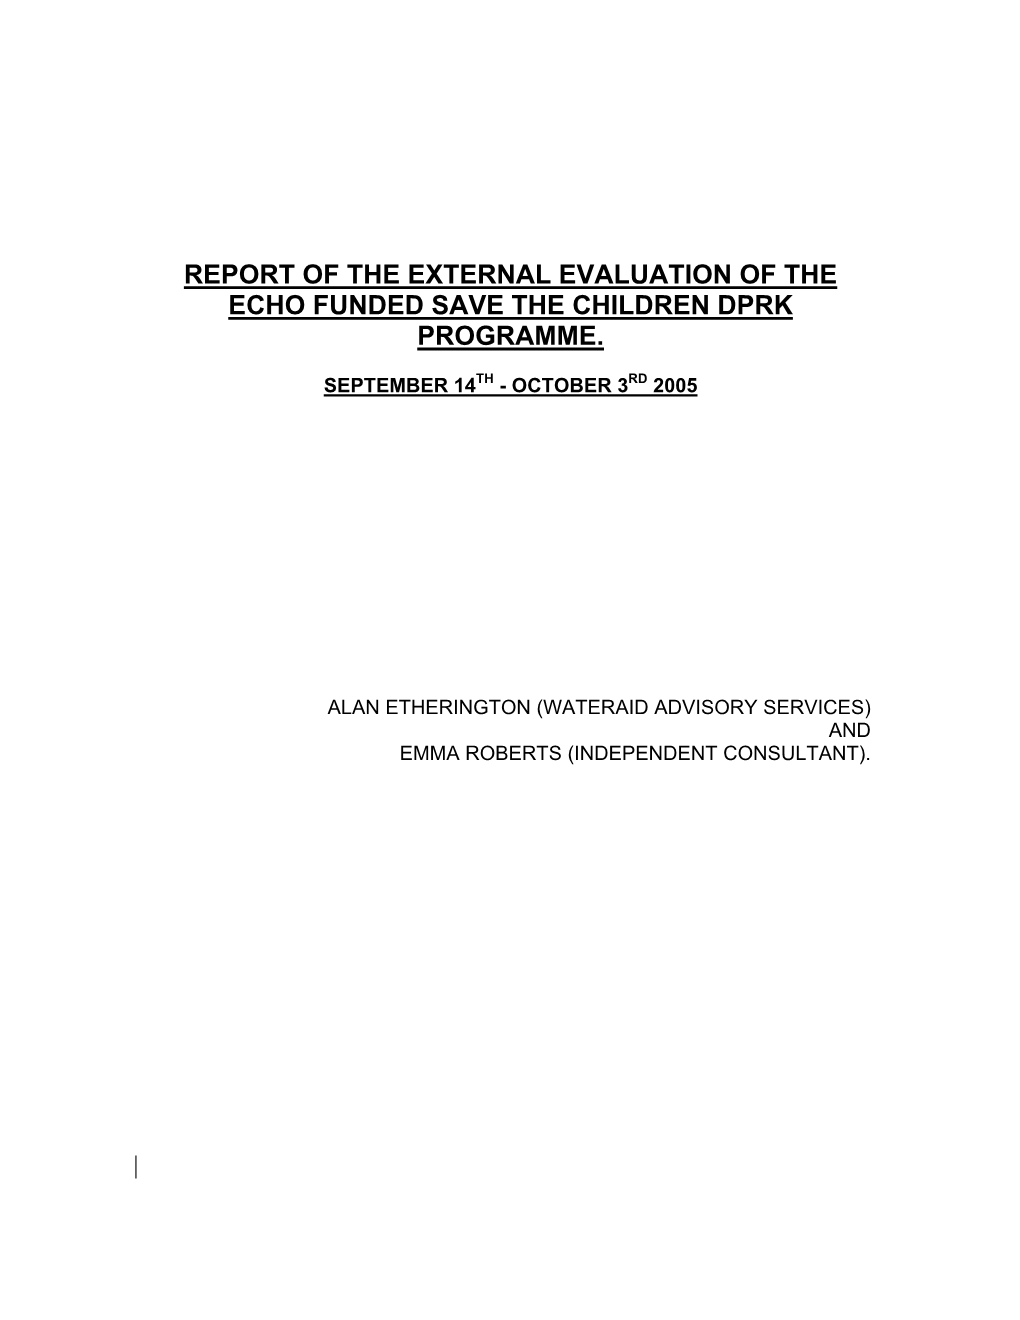 Report of the External Evaluation of the Echo Funded Save the Children Dprk Programme